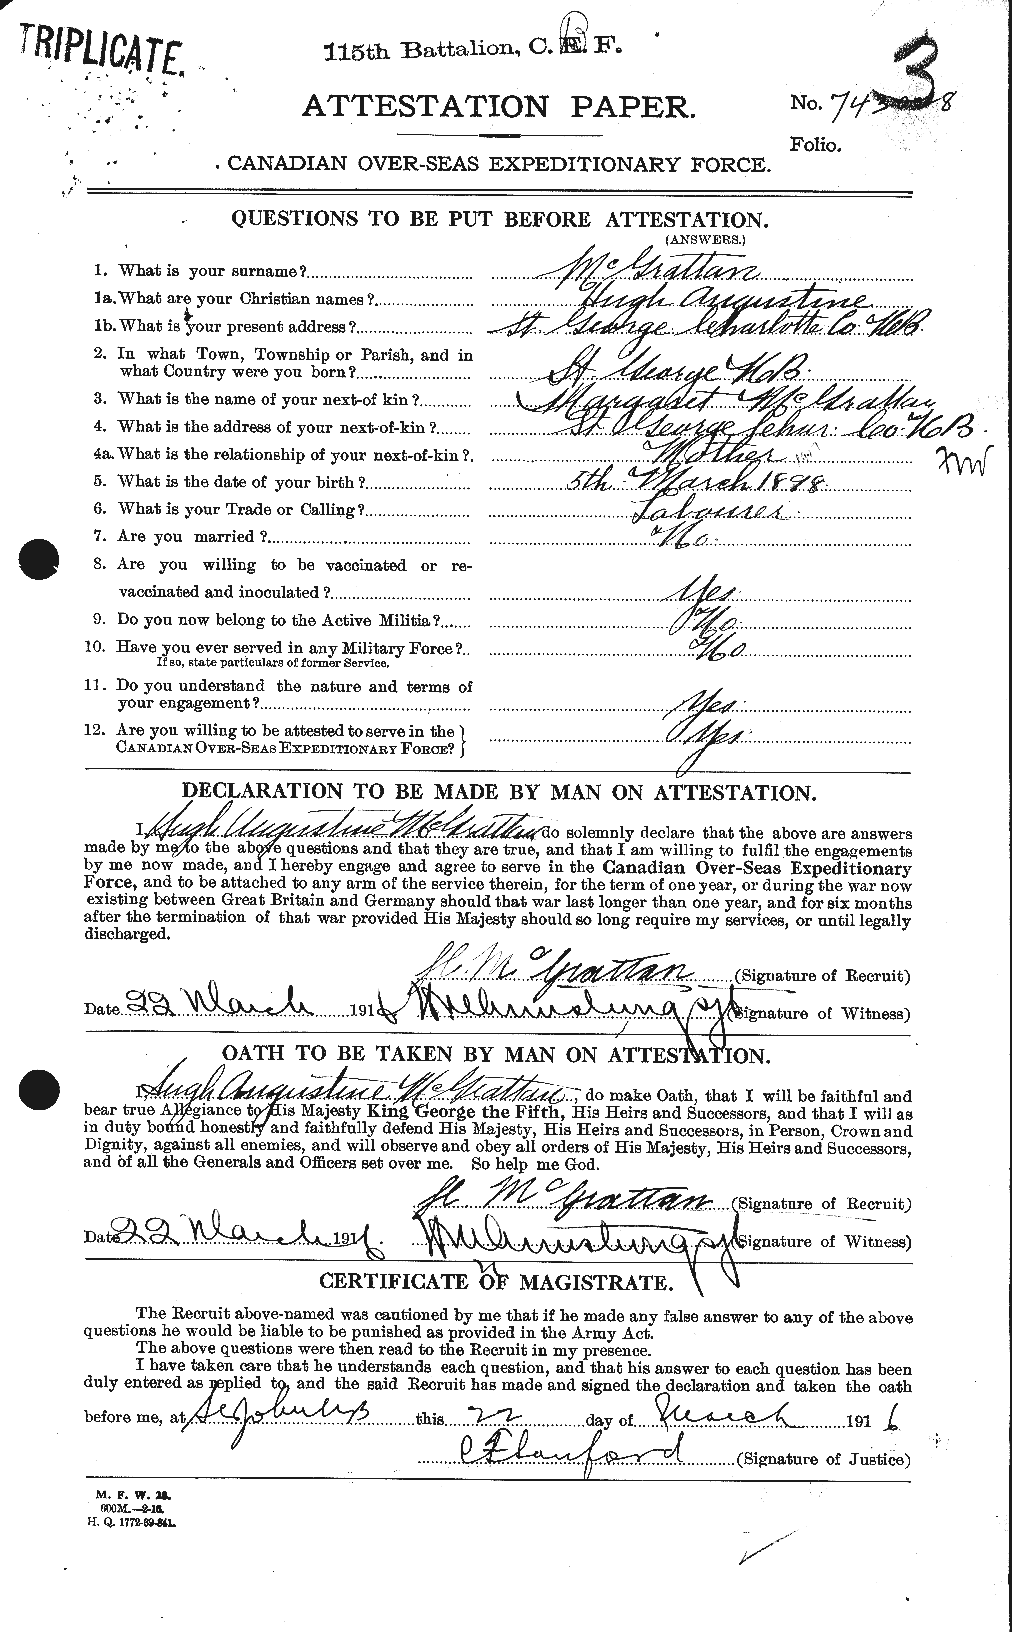 Personnel Records of the First World War - CEF 523710a